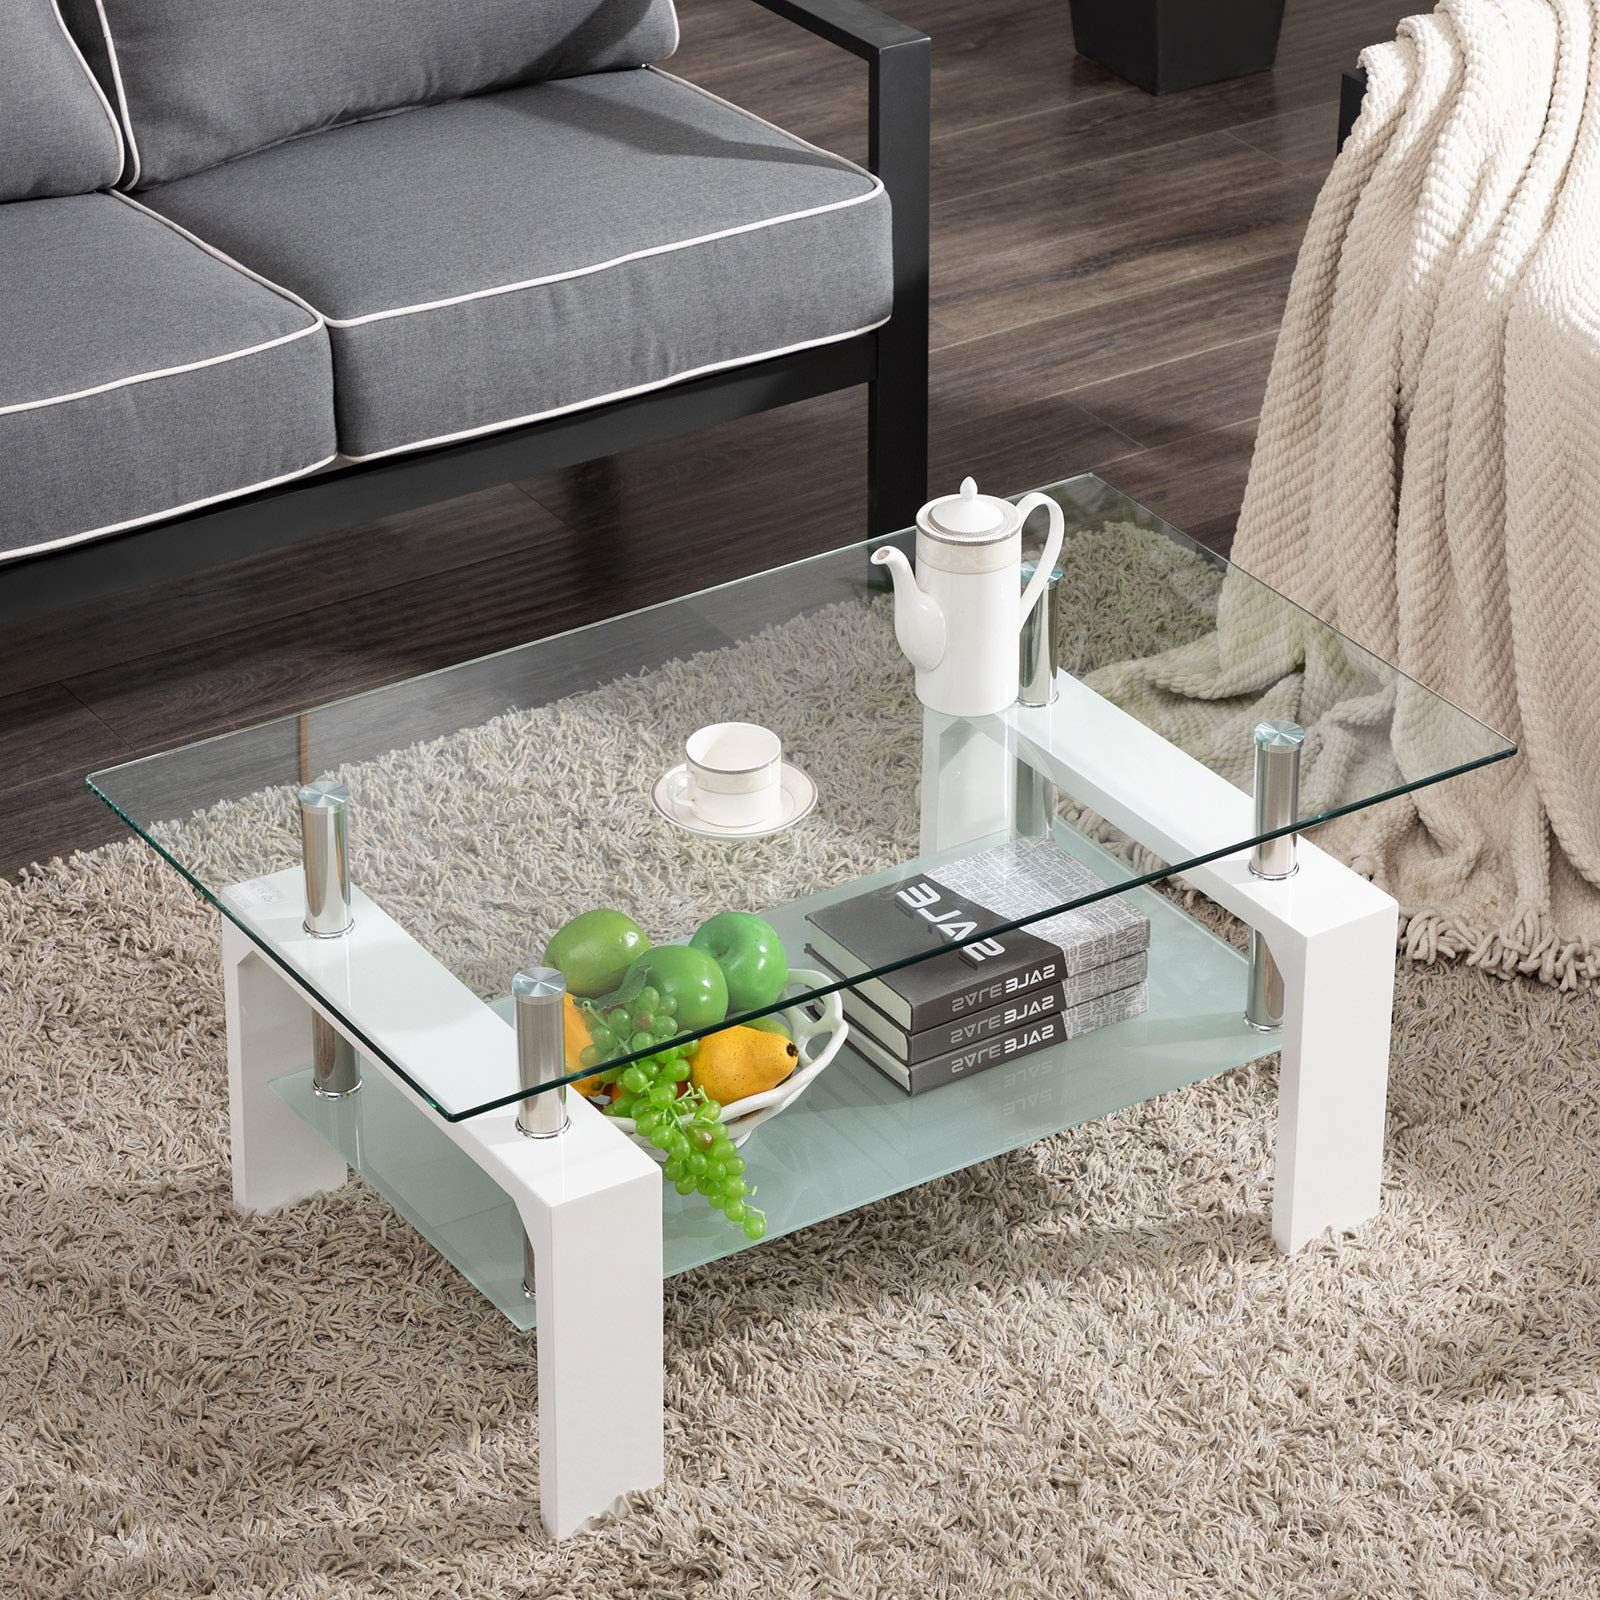 Most Current Glass Coffee Tables With Lower Shelves Inside Amazon: Living Room Rectangle Glass Coffee Table, Modern Living Room  Table With Lower Shelf, Clear Tempered Glass Top With White Color Wooden  Legs,living Room Furniture,waiting Area Table : Home & Kitchen (Photo 3 of 10)